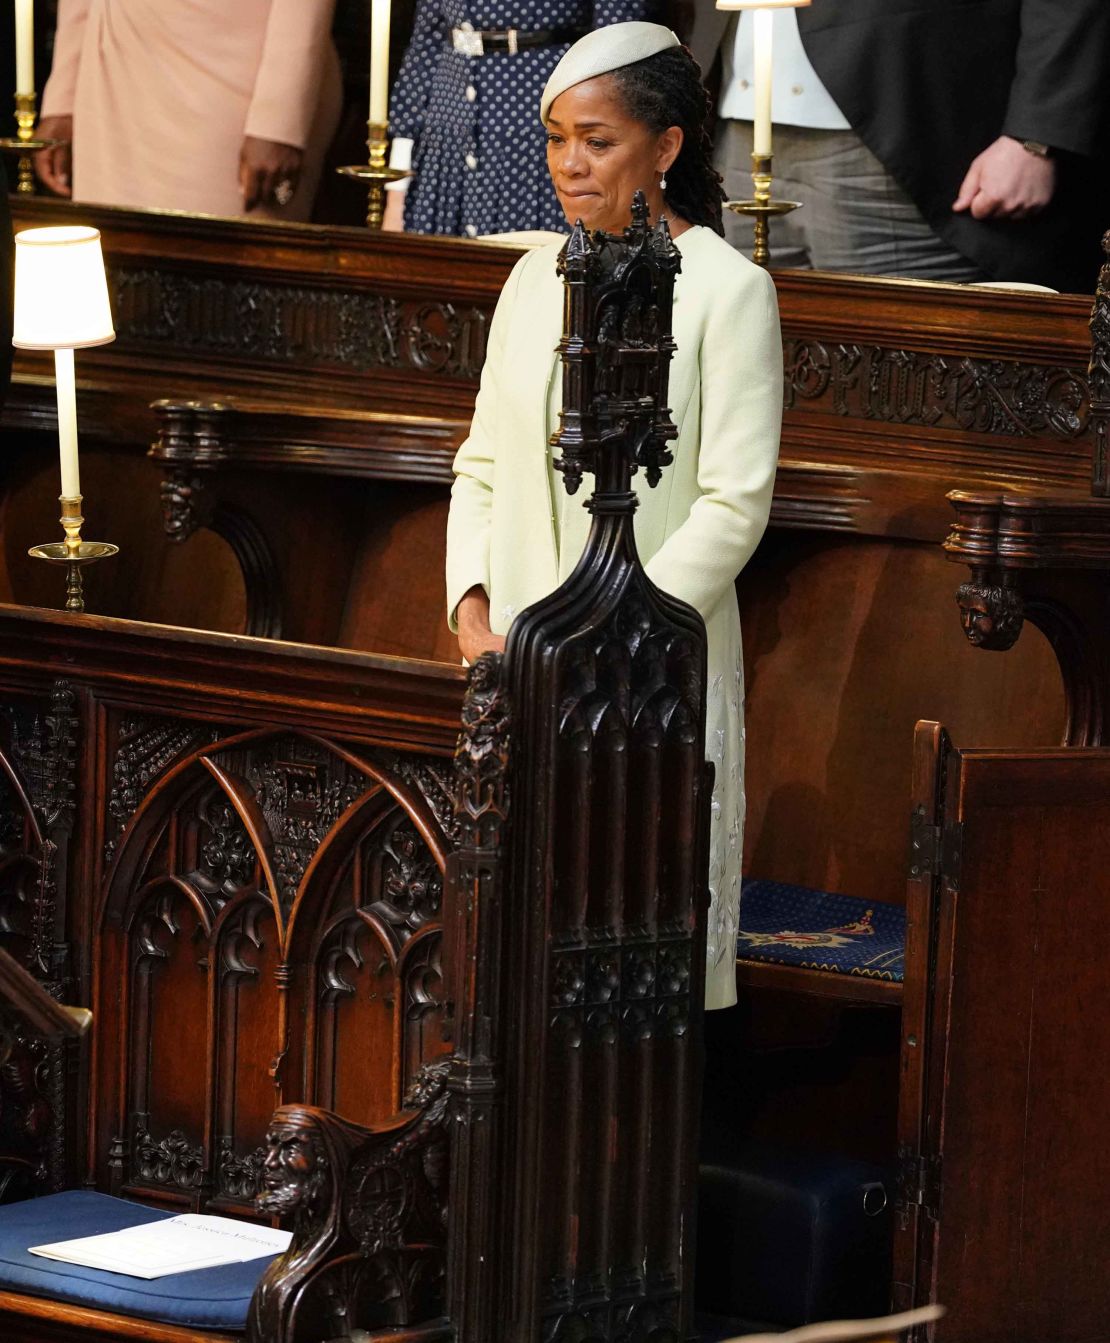 Meghan Markle's mother, Doria Ragland, takes her seat in St. George's Chapel for the wedding of her daughter and Britain's Prince Harry.